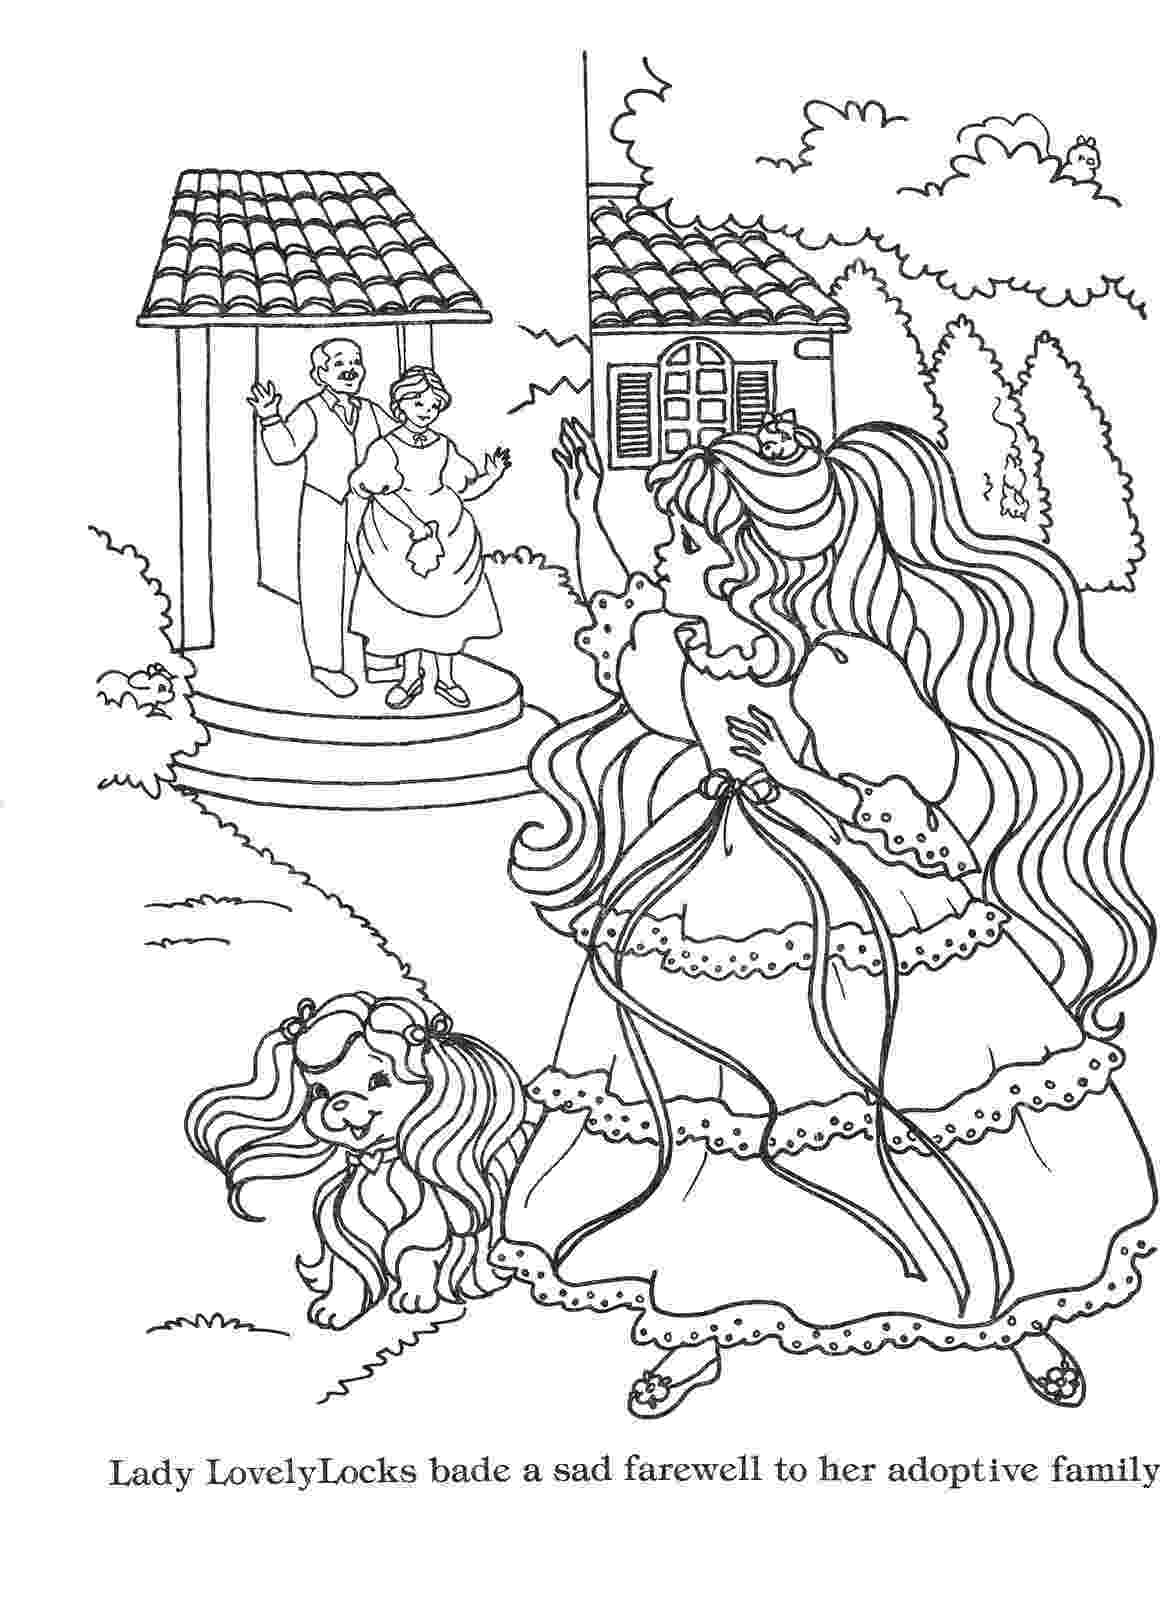 coloring page book lady lovely locks coloring book lady lovely locks the coloring page book 